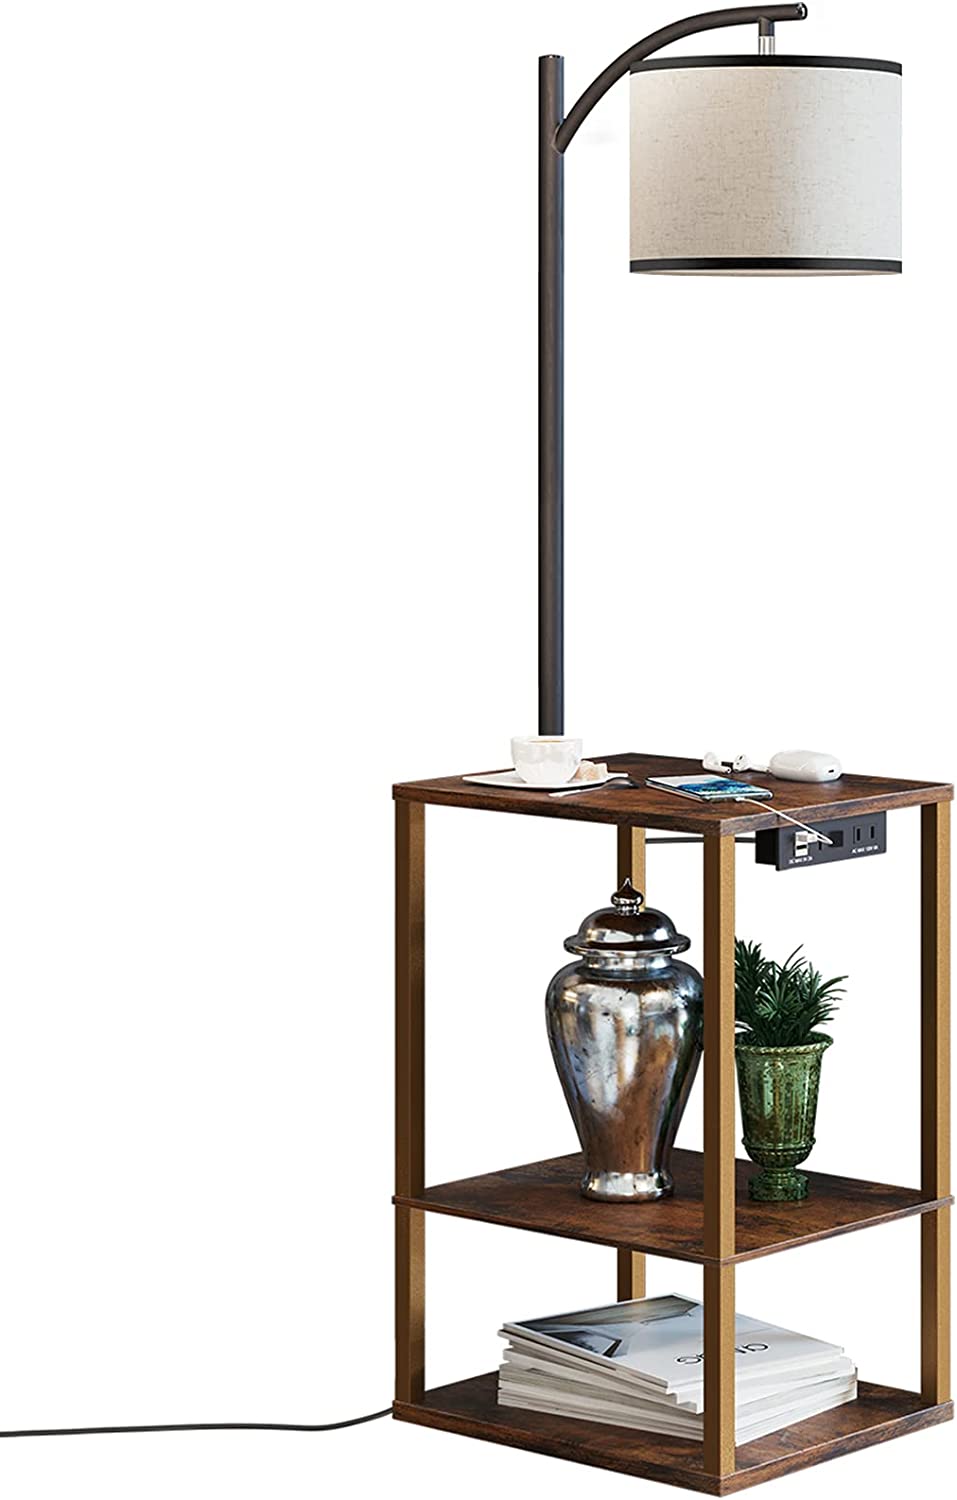 SUNMORY Floor Lamp with Table, Lamps for Living Room with USB Port, Attached End Table with Shelves, Brown - image 1 of 9